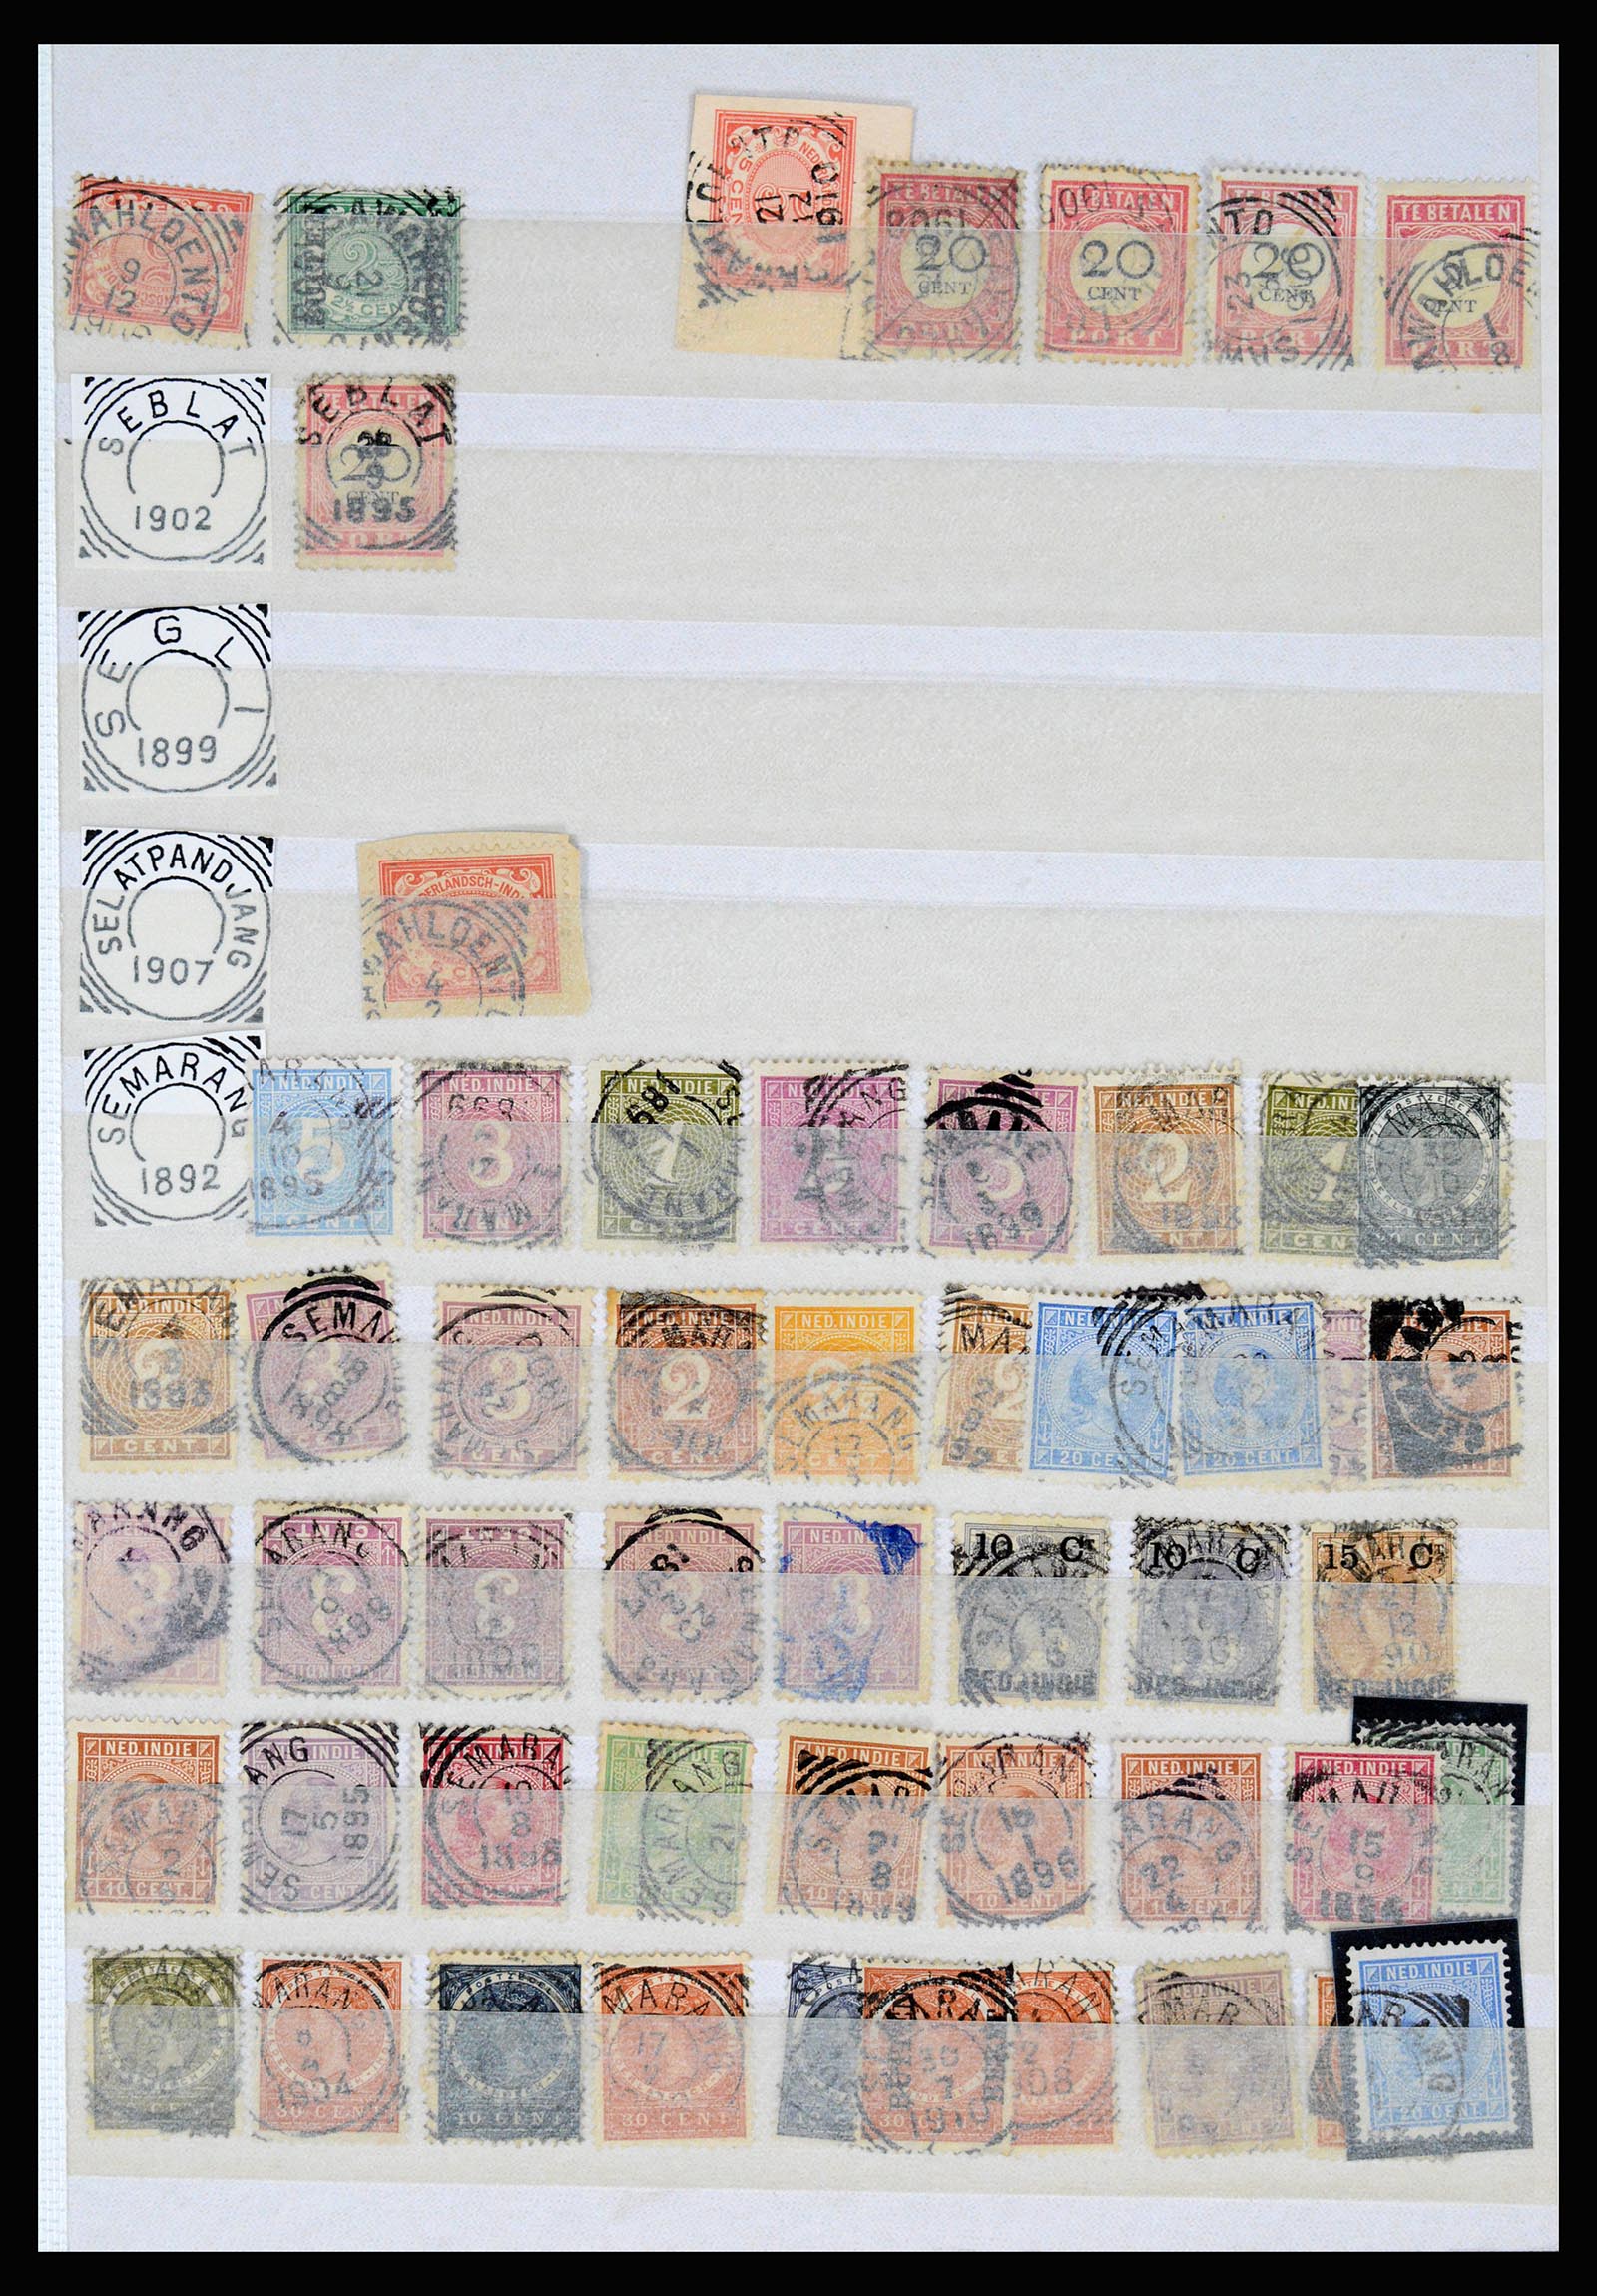 36839 088 - Stamp collection 36839 Dutch east Indies square cancels.